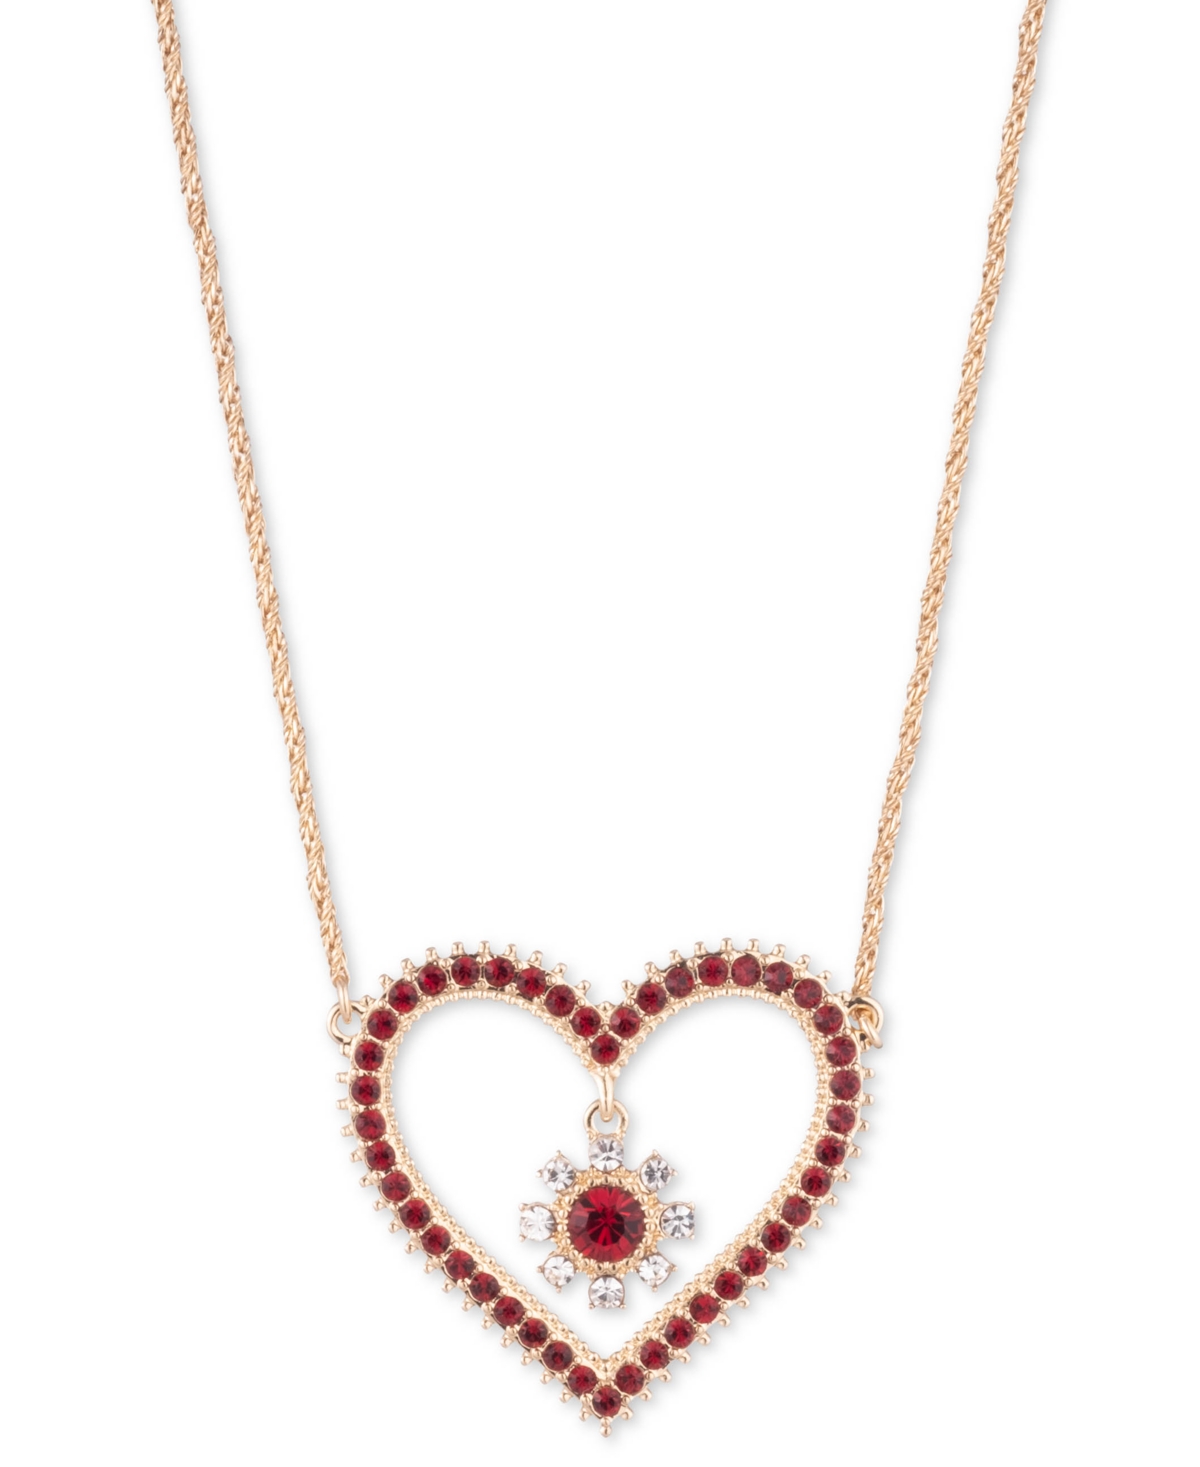 Marchesa Gold-tone Color Crystal Heart Pendant Necklace, 16" + 3" Extender In Red Cherry